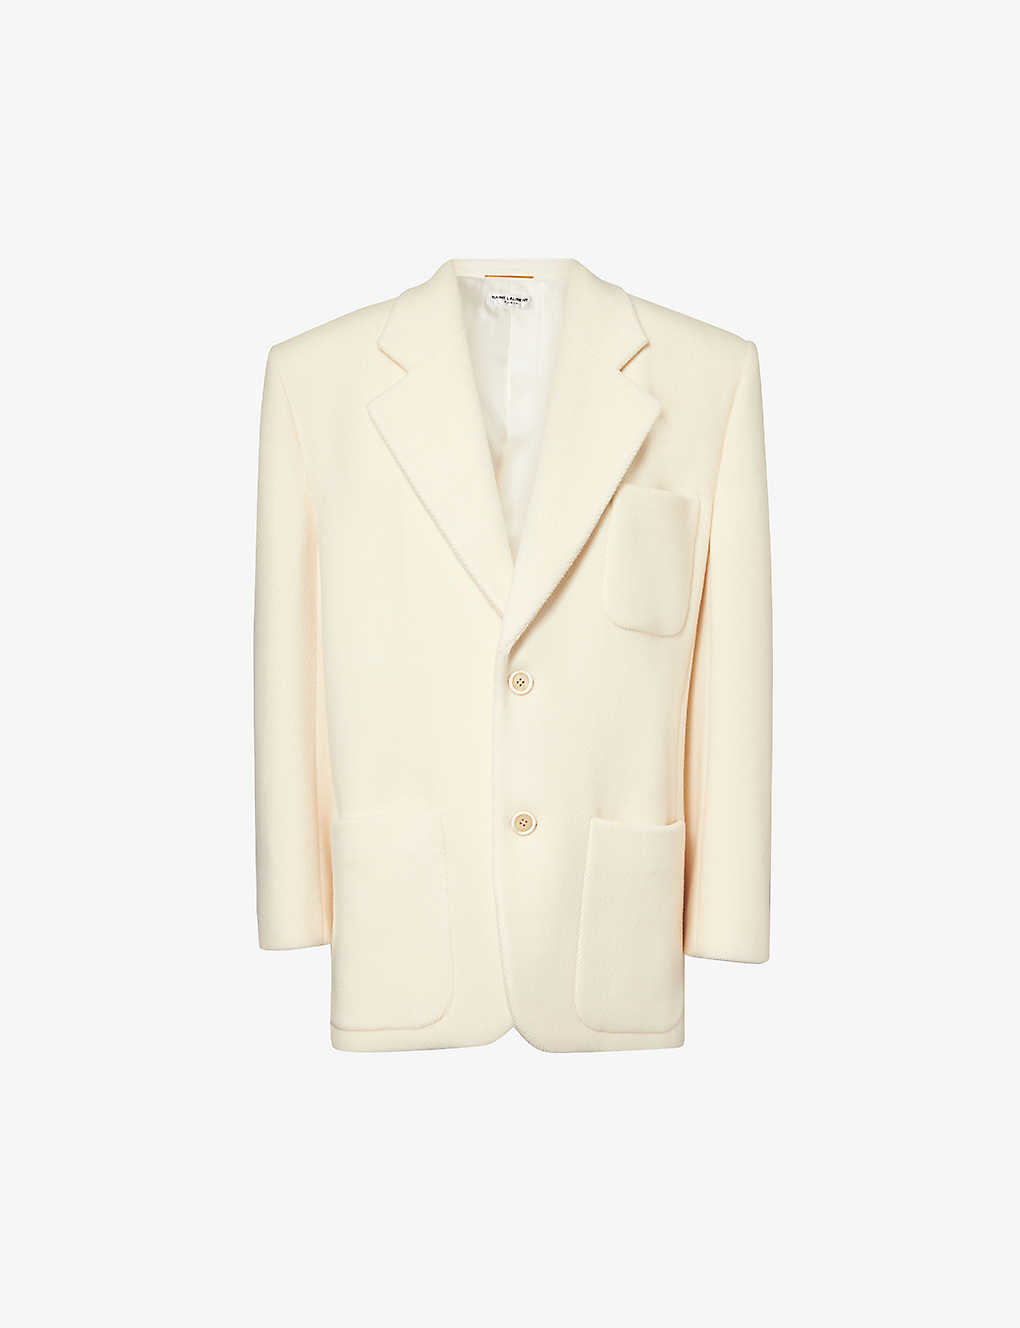 SAINT LAURENT OVERSIZED EXAGGERATED-SHOULDER SINGLE-BREASTED WOOL BLAZER